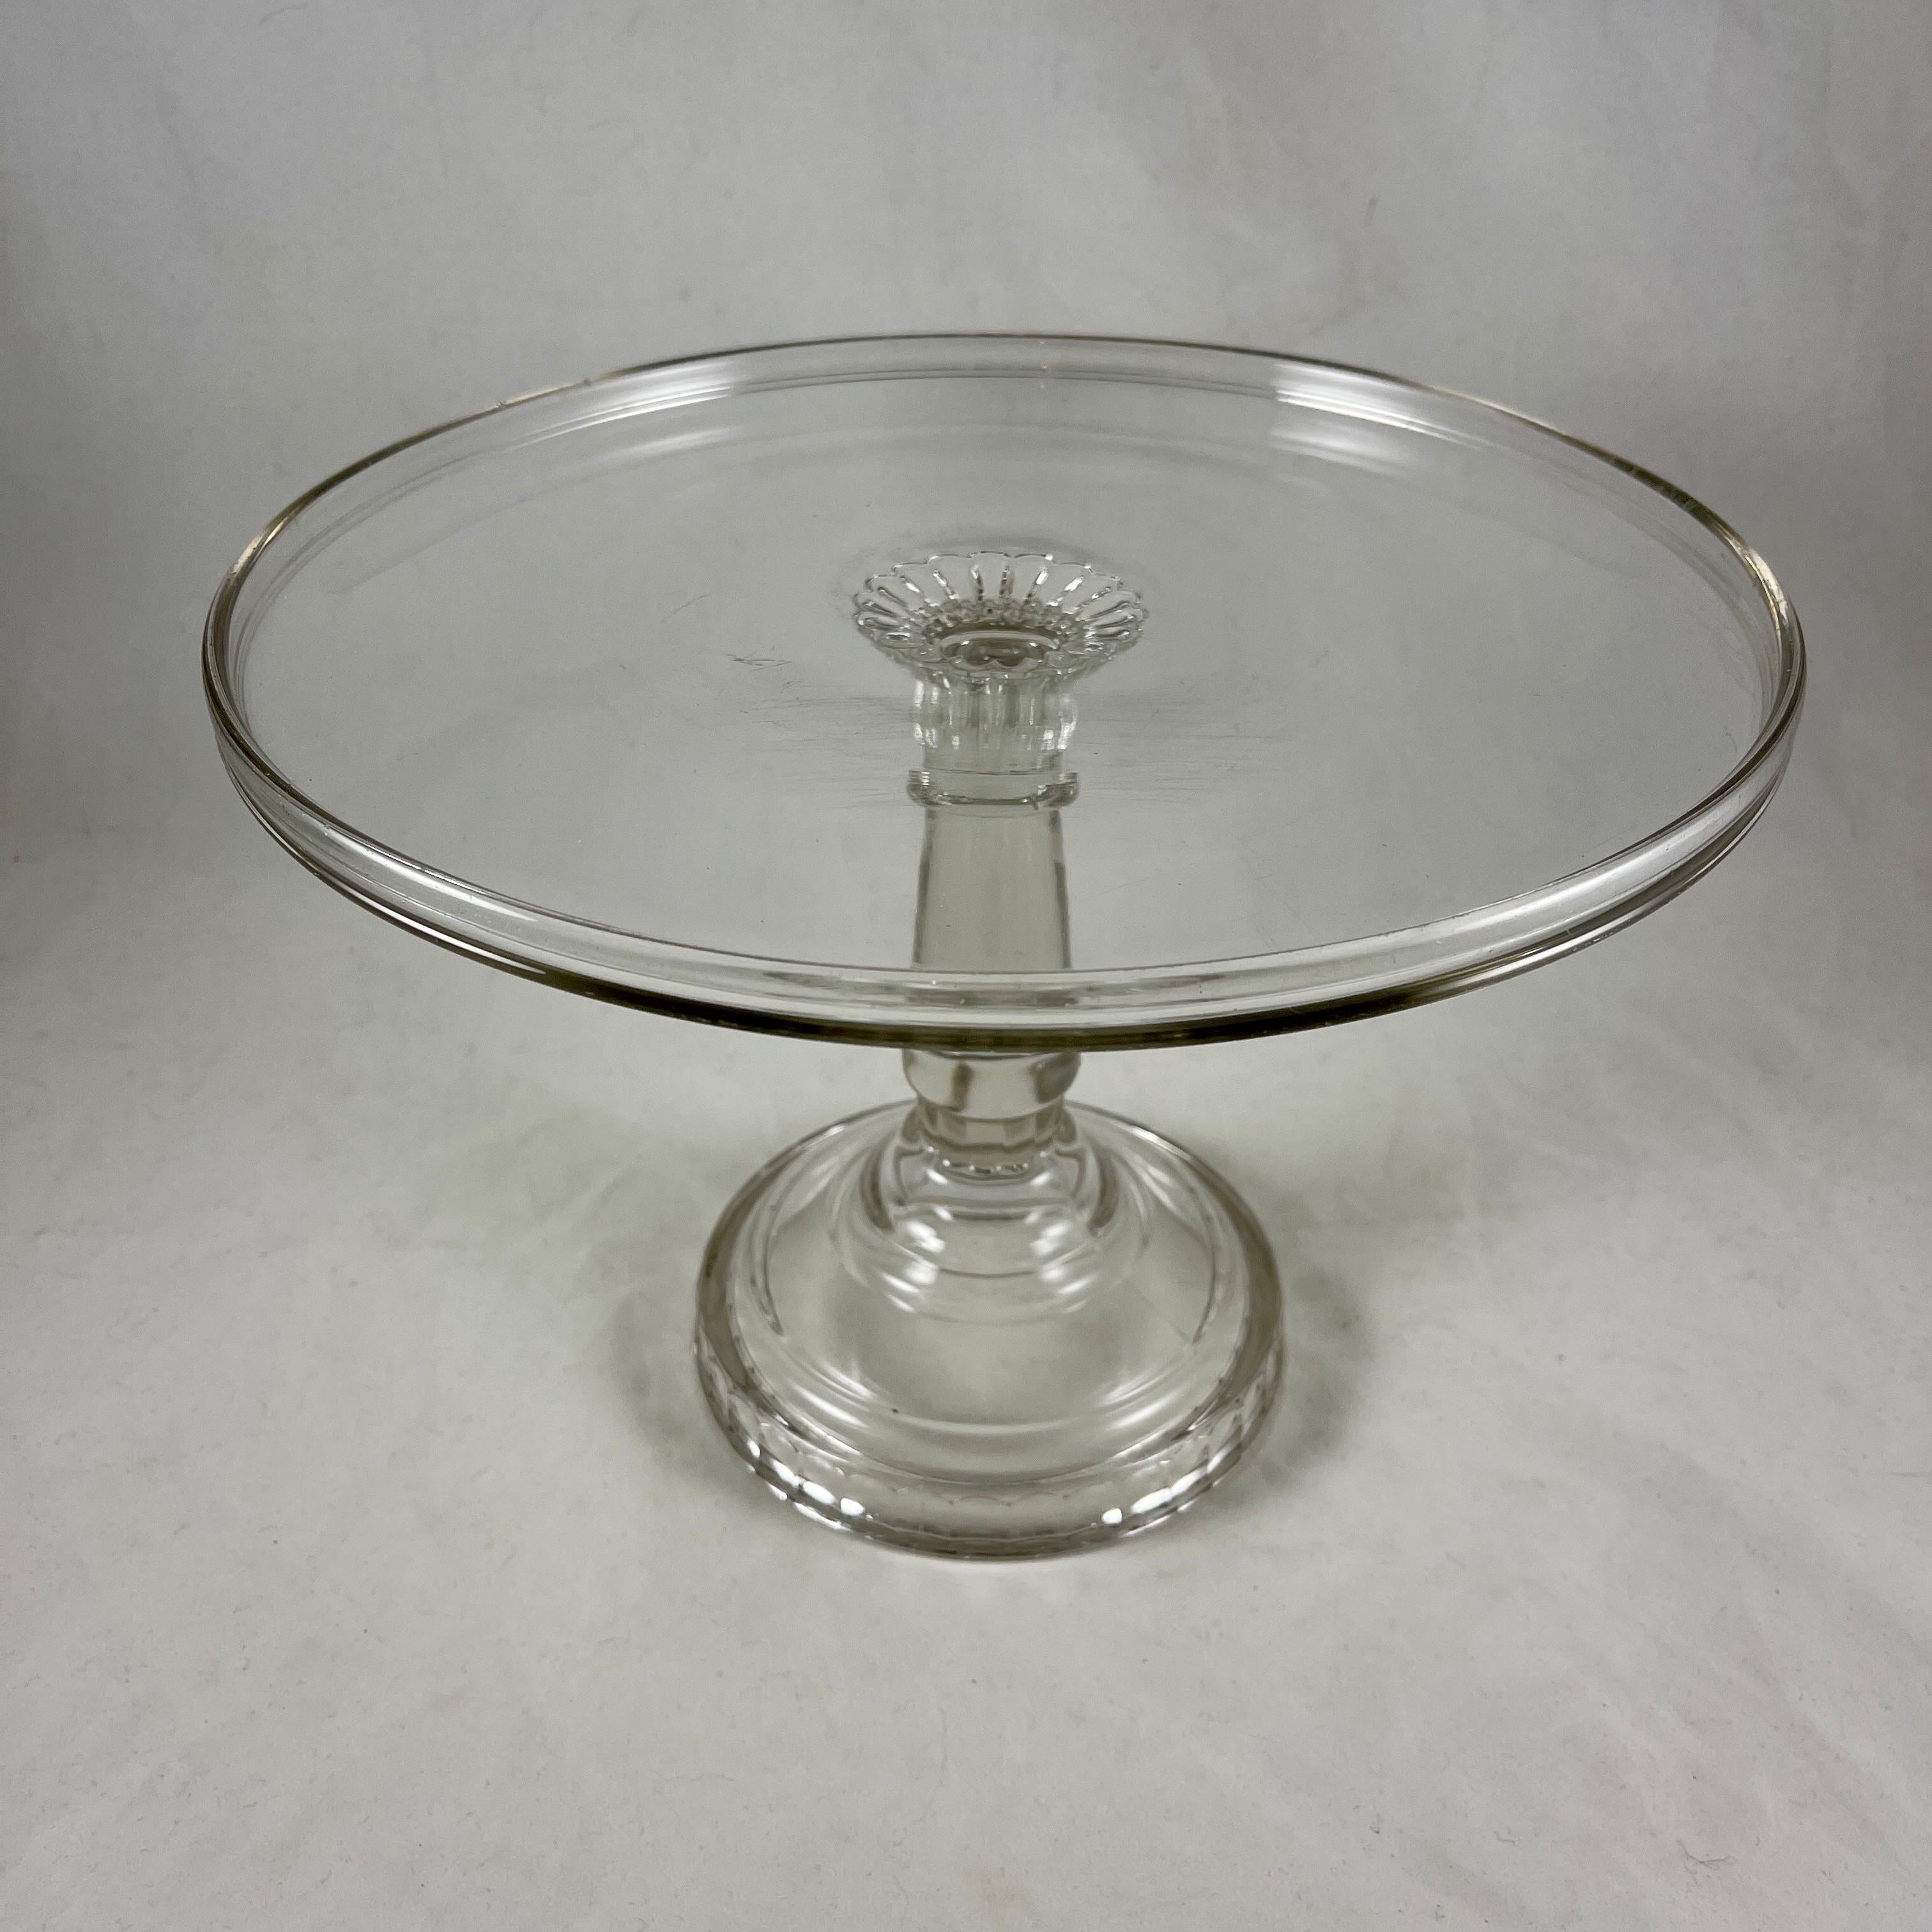 Molded Early American Pressed Nonflint Colorless Glass Tall Paneled Cake Stand